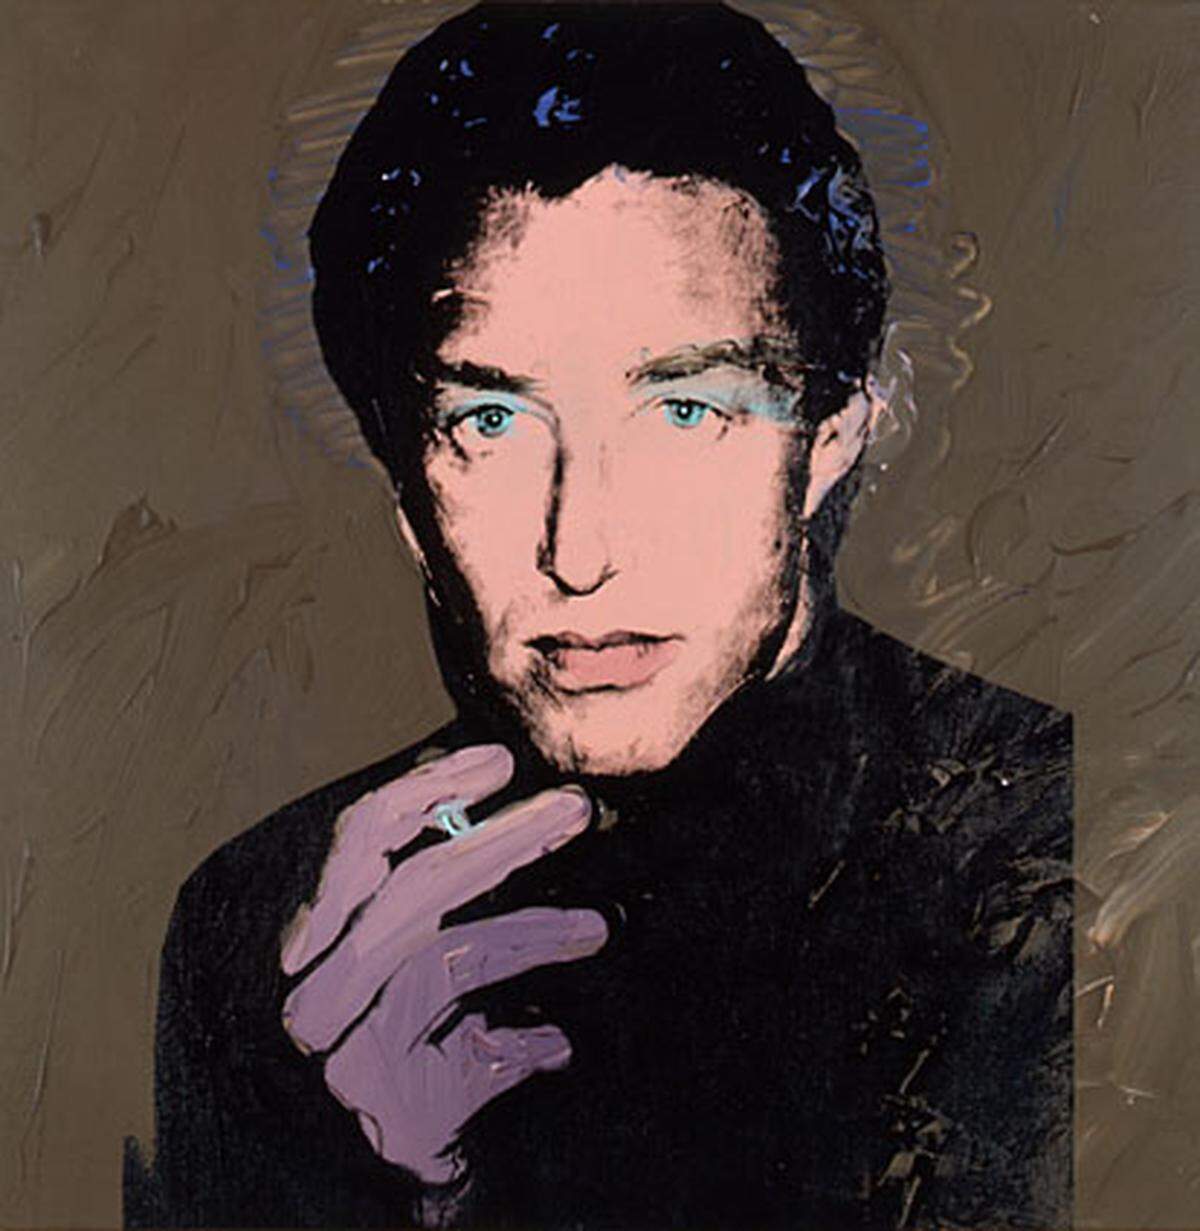 Andy Warhol, Porträt des Modeschöpfers Roy Halston, 1974, Peter Infeld Privatstiftung (c) The Estate and Foundation of Andy Warhol/VBK Wien, 2009